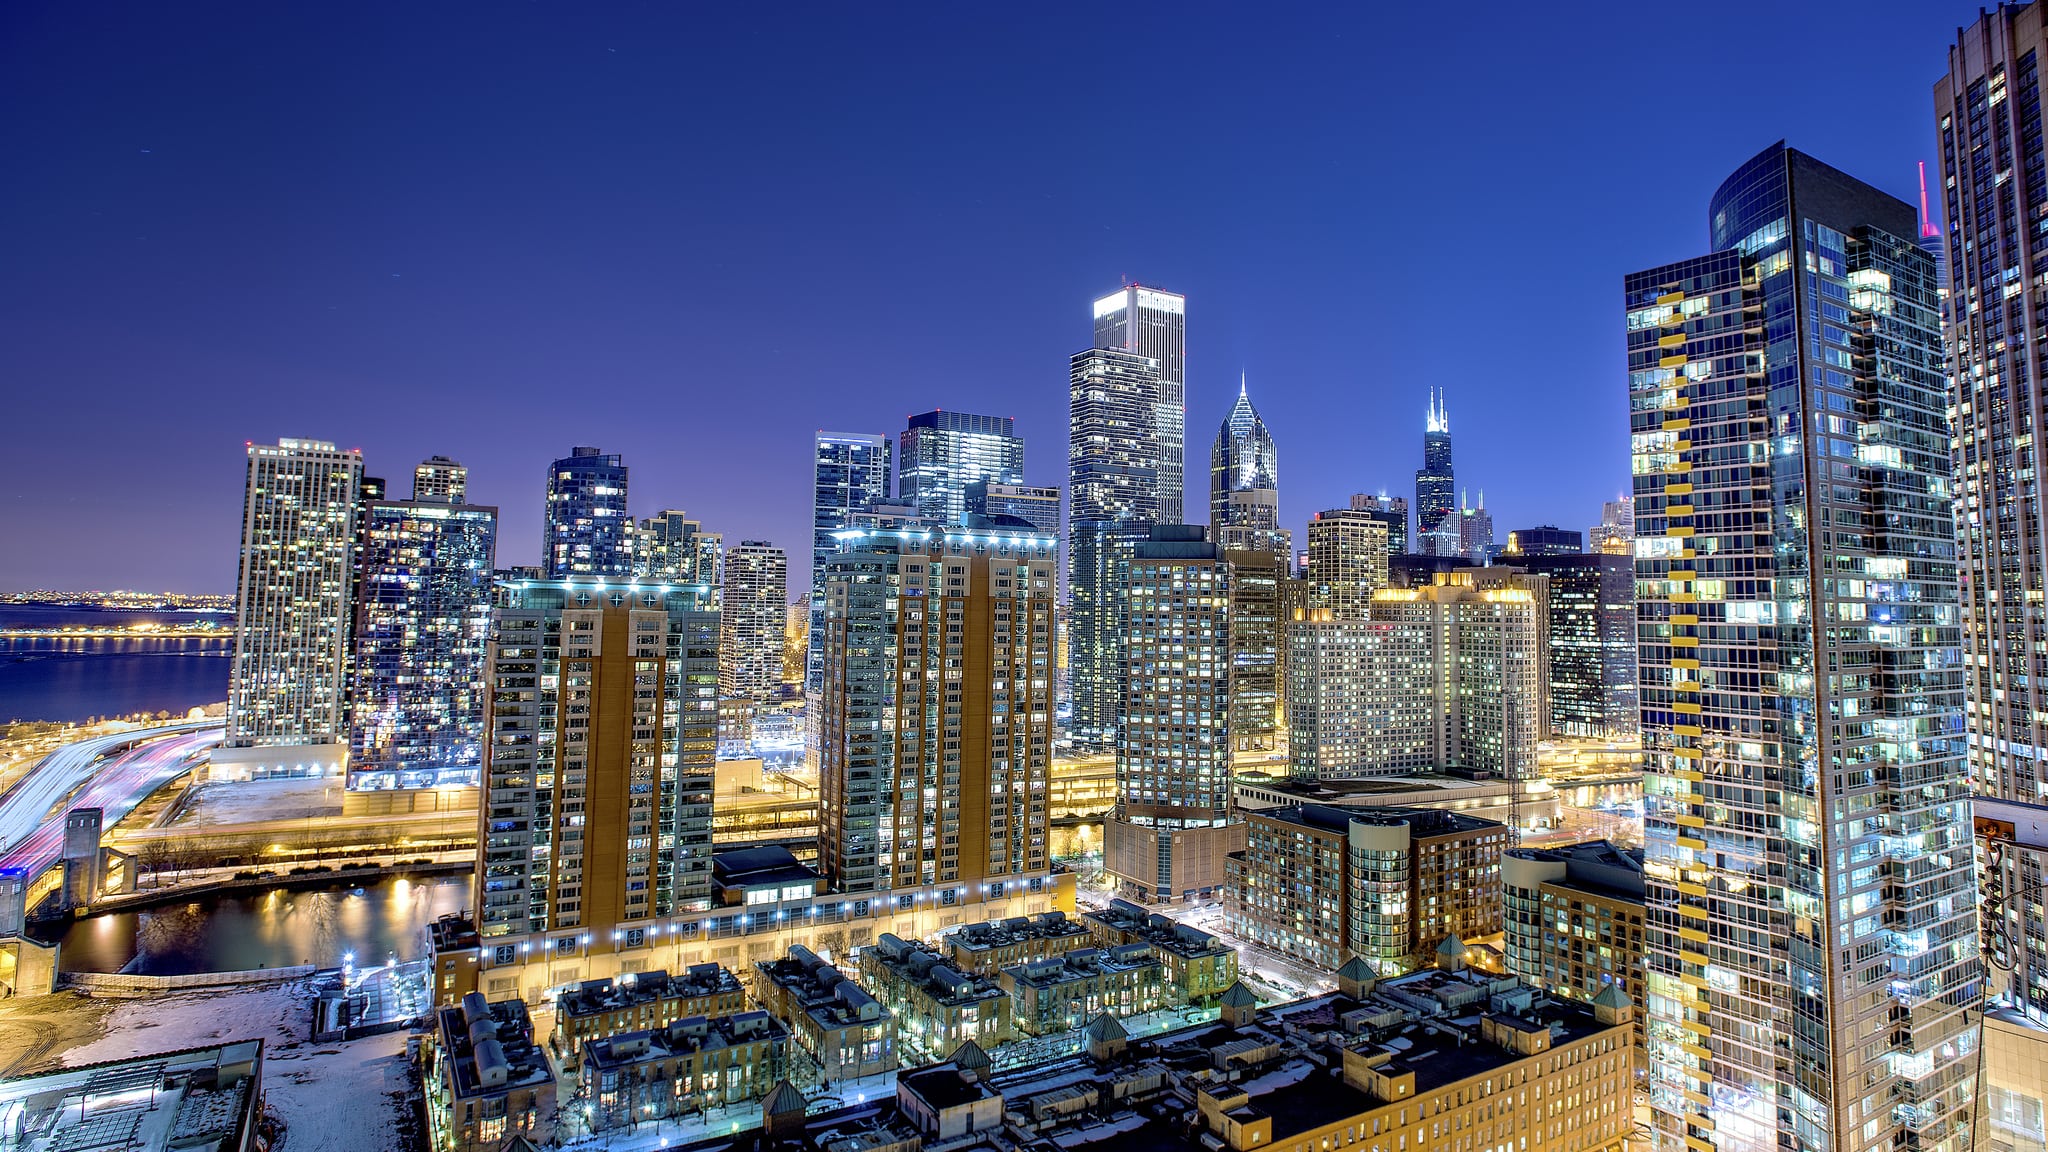 The night skyline of downtown Chicago. 